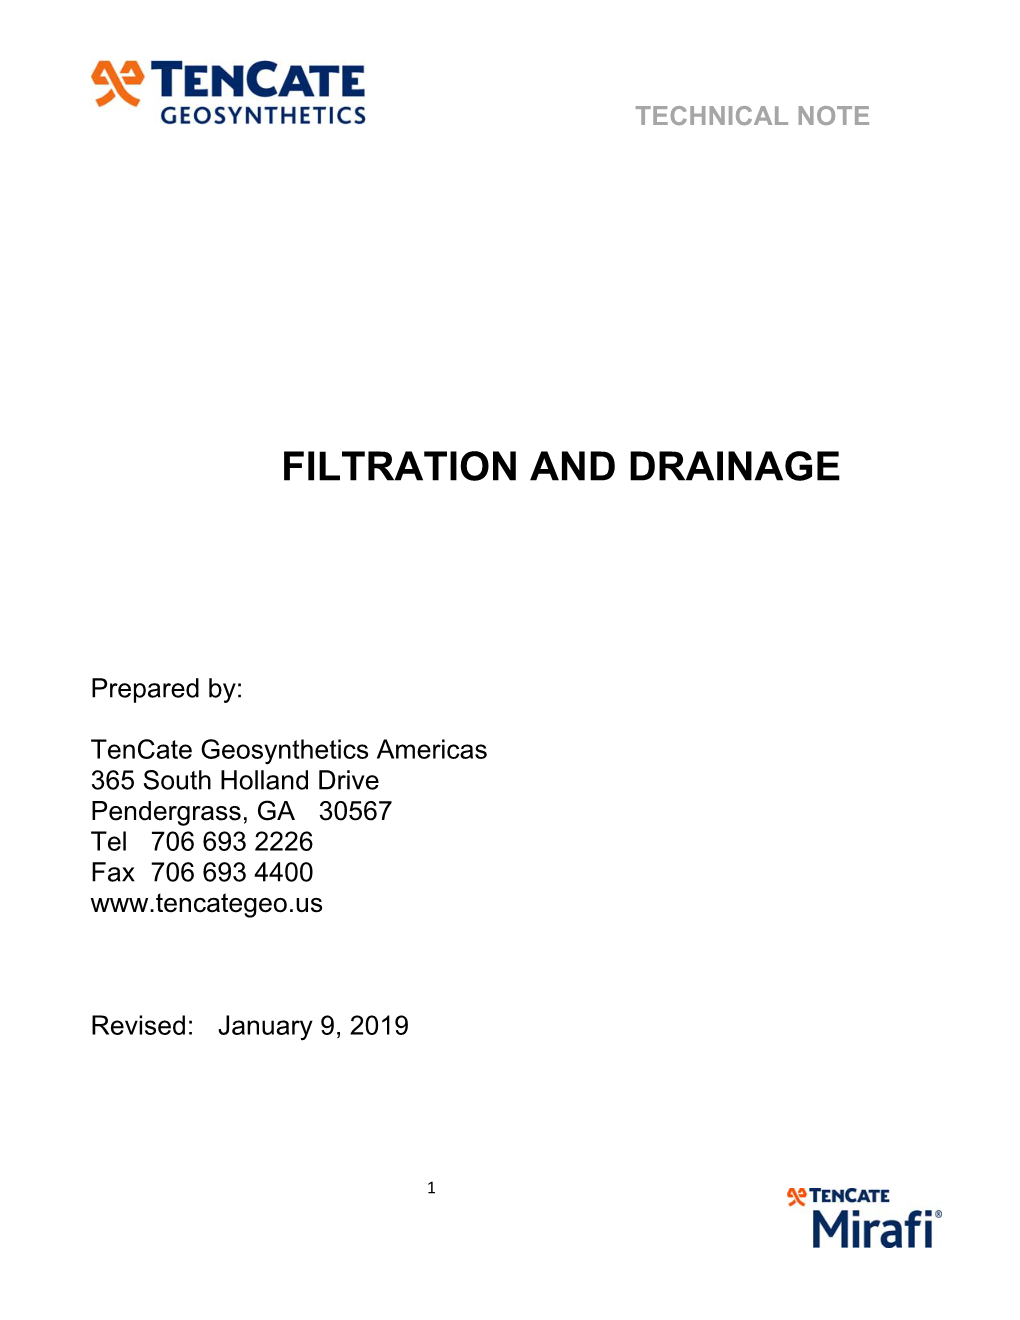 Filtration and Drainage